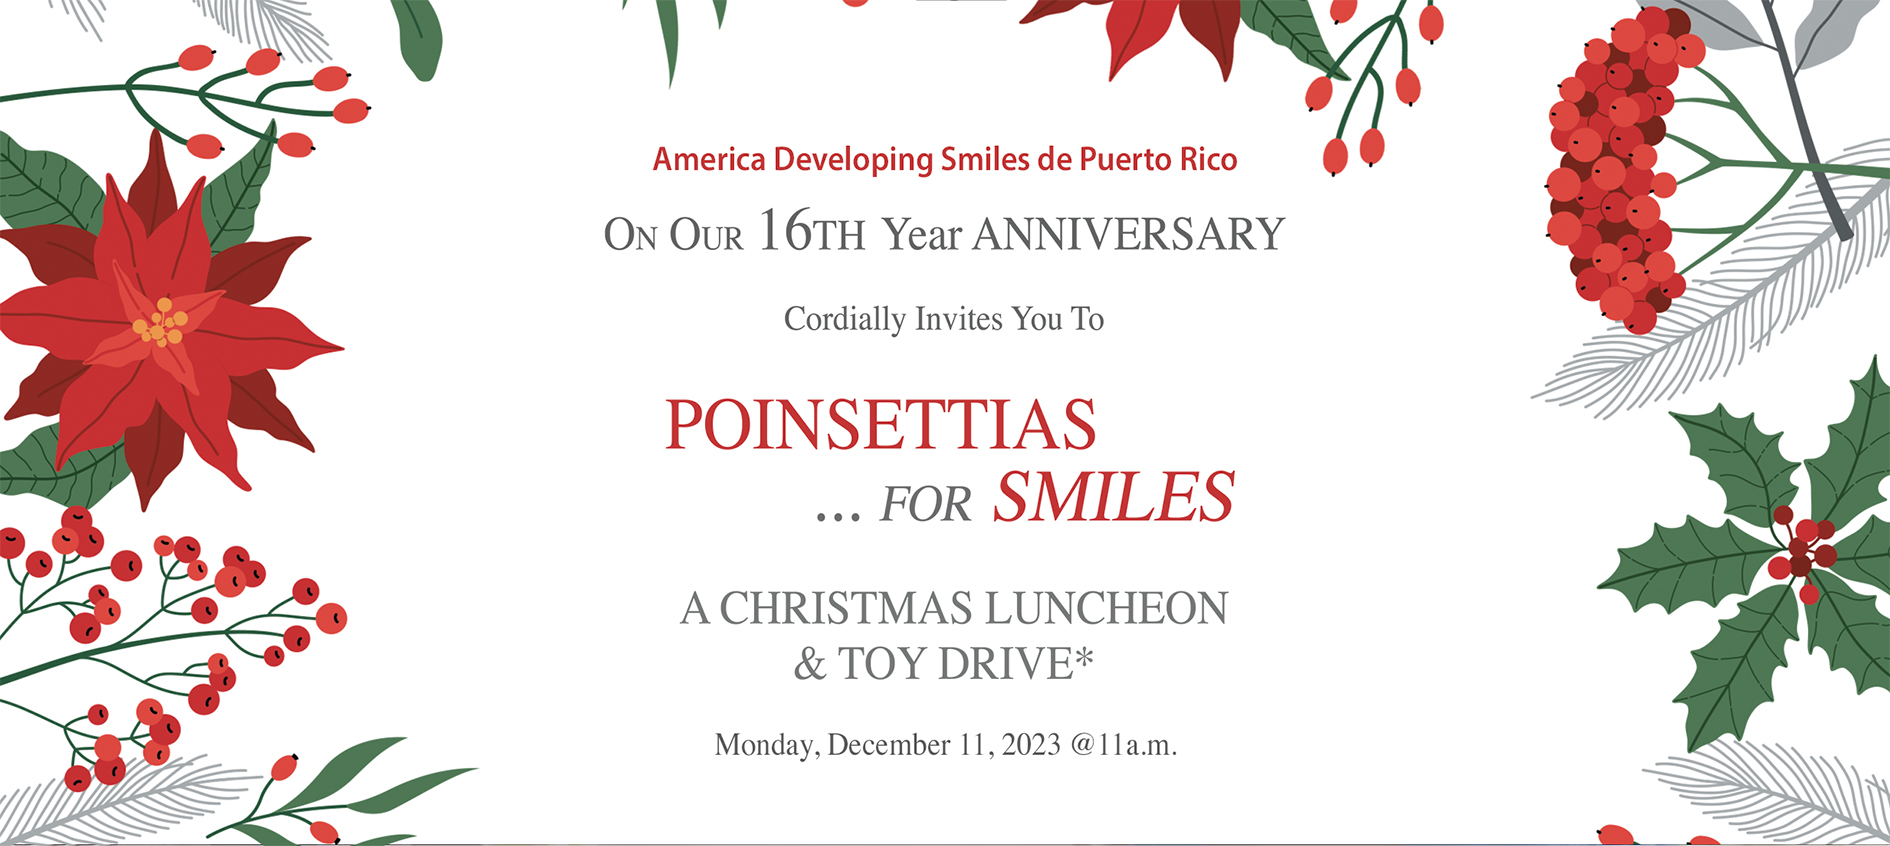 POInSETTIAS ... for Smiles A CHRISTMAS Luncheon & Toy Drive